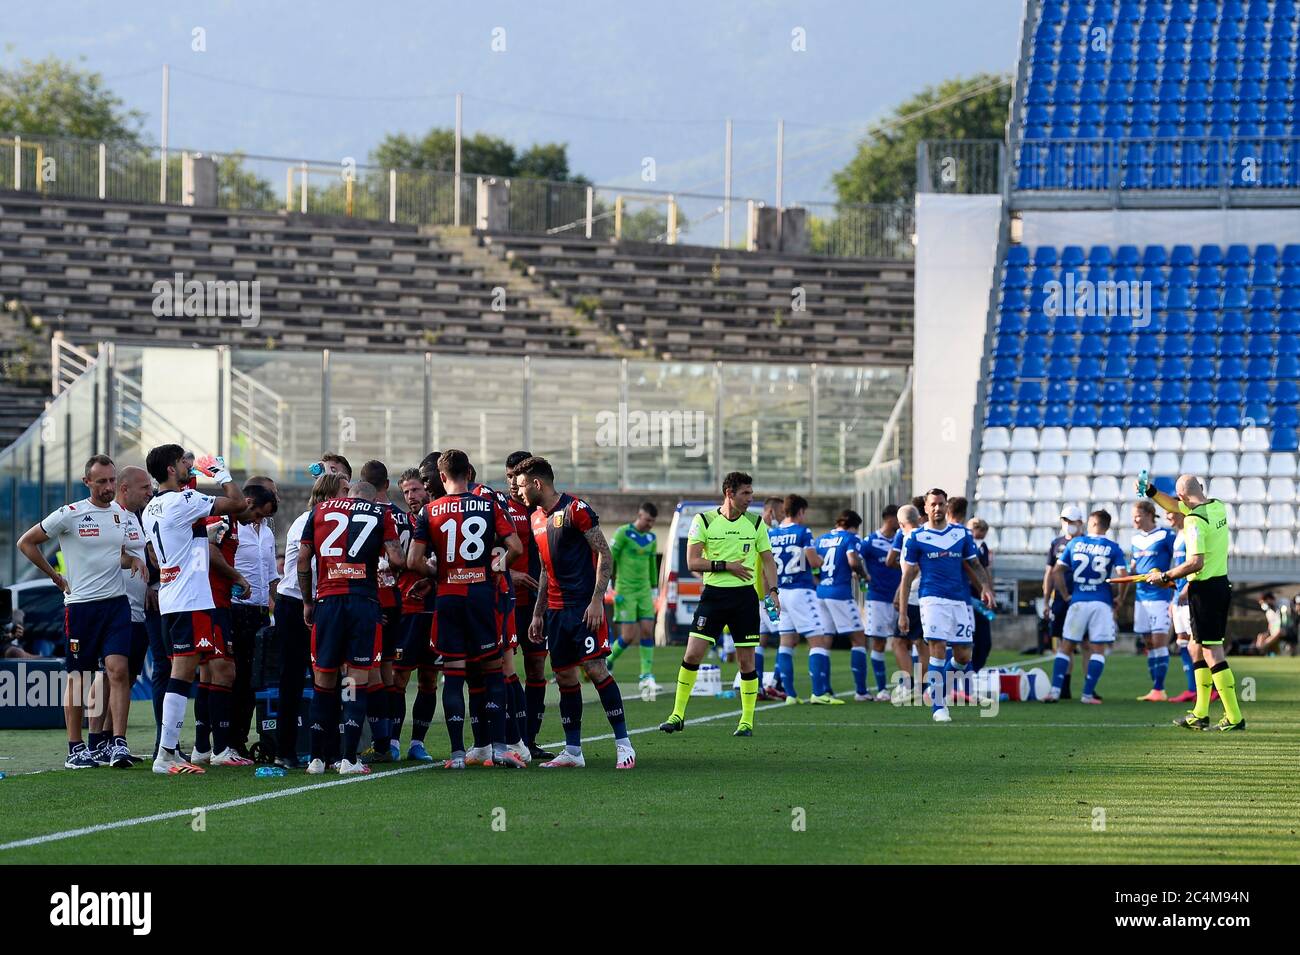 Brescia, Italy - 27 June, 2020: General view of cooling break during the Serie A football match between Brescia Calcio and Genoa CFC. The match ended in a 2-2 tie. Credit: Nicolò Campo/Alamy Live News Stock Photo